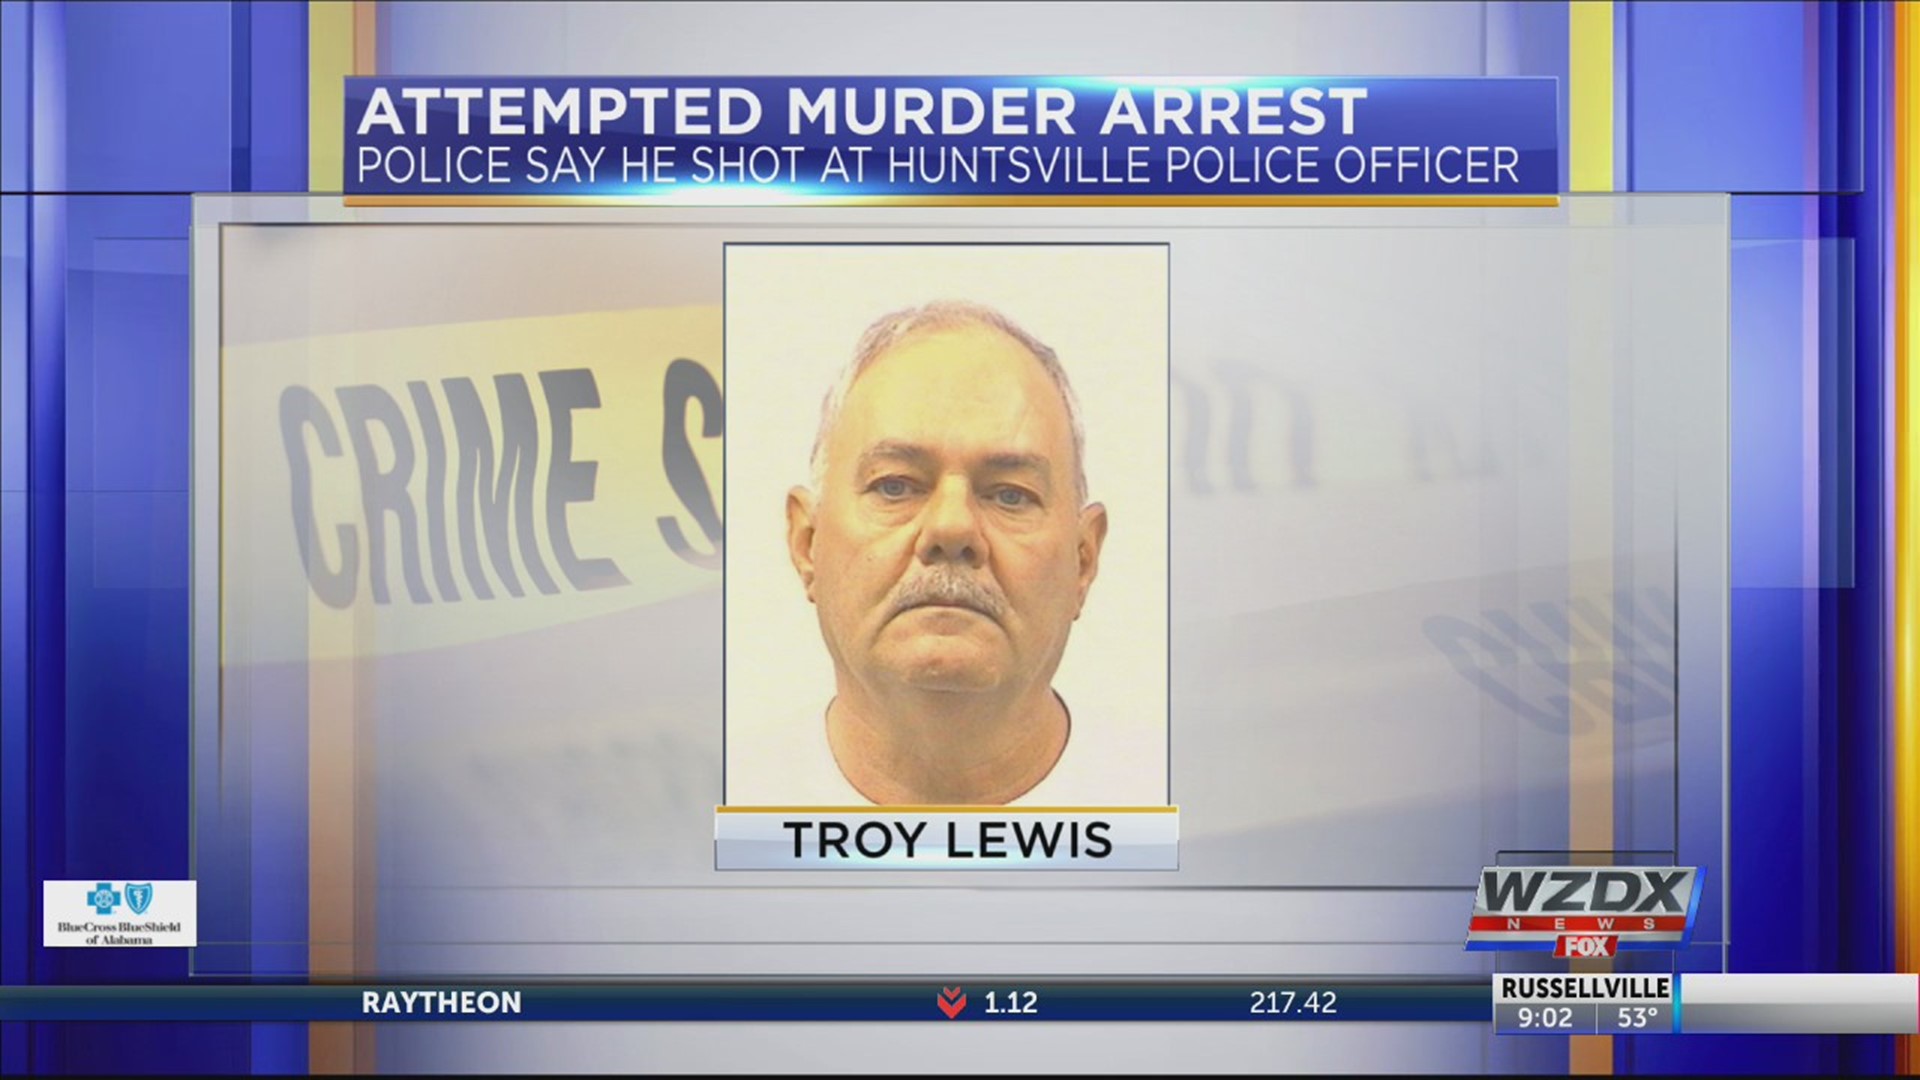 Troy Lewis has been hospitalized after being taken into custody. While he only obtained minor injuries being arrested, when he reached the hospital, pre-existing medical conditions required that he stay for additional treatment.